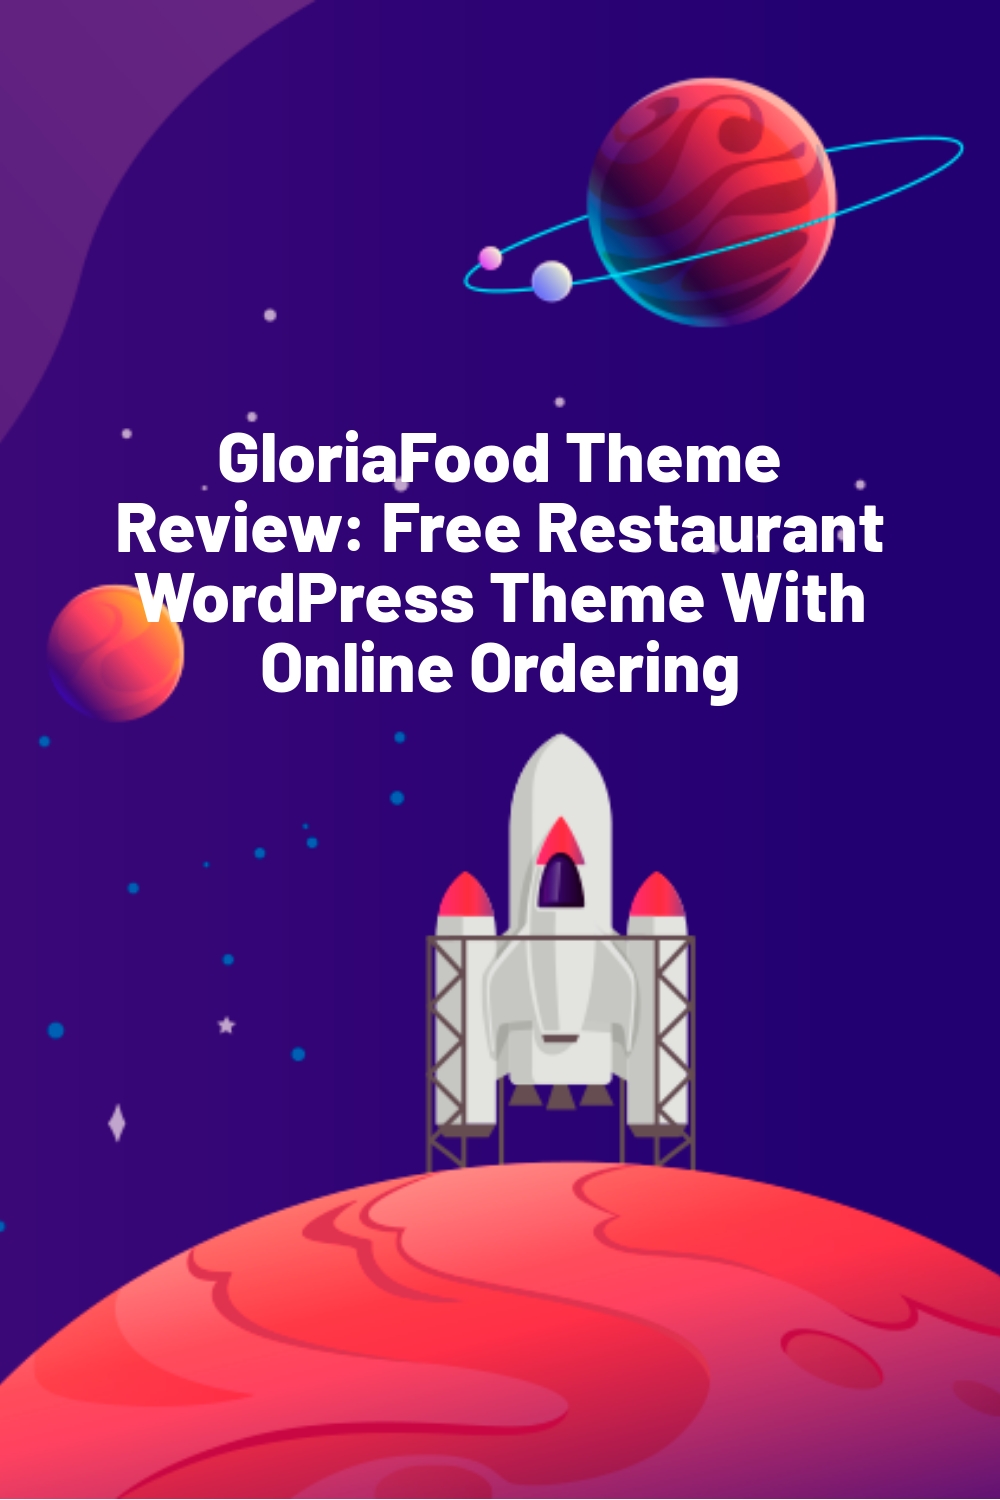 GloriaFood Theme Review: Free Restaurant WordPress Theme With Online Ordering